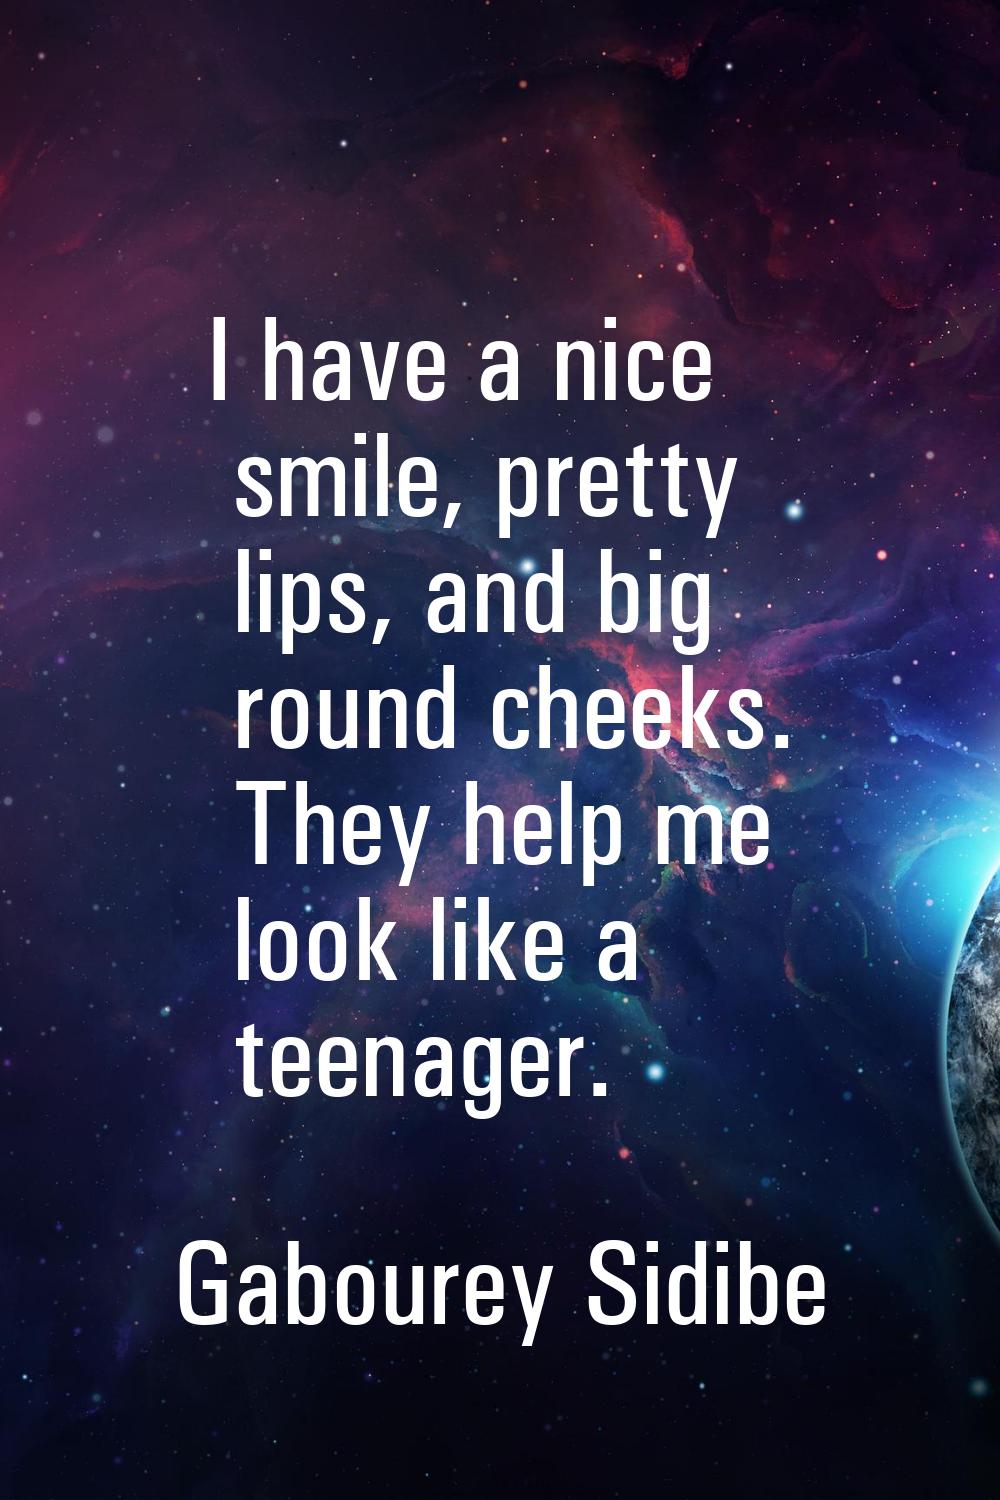 I have a nice smile, pretty lips, and big round cheeks. They help me look like a teenager.